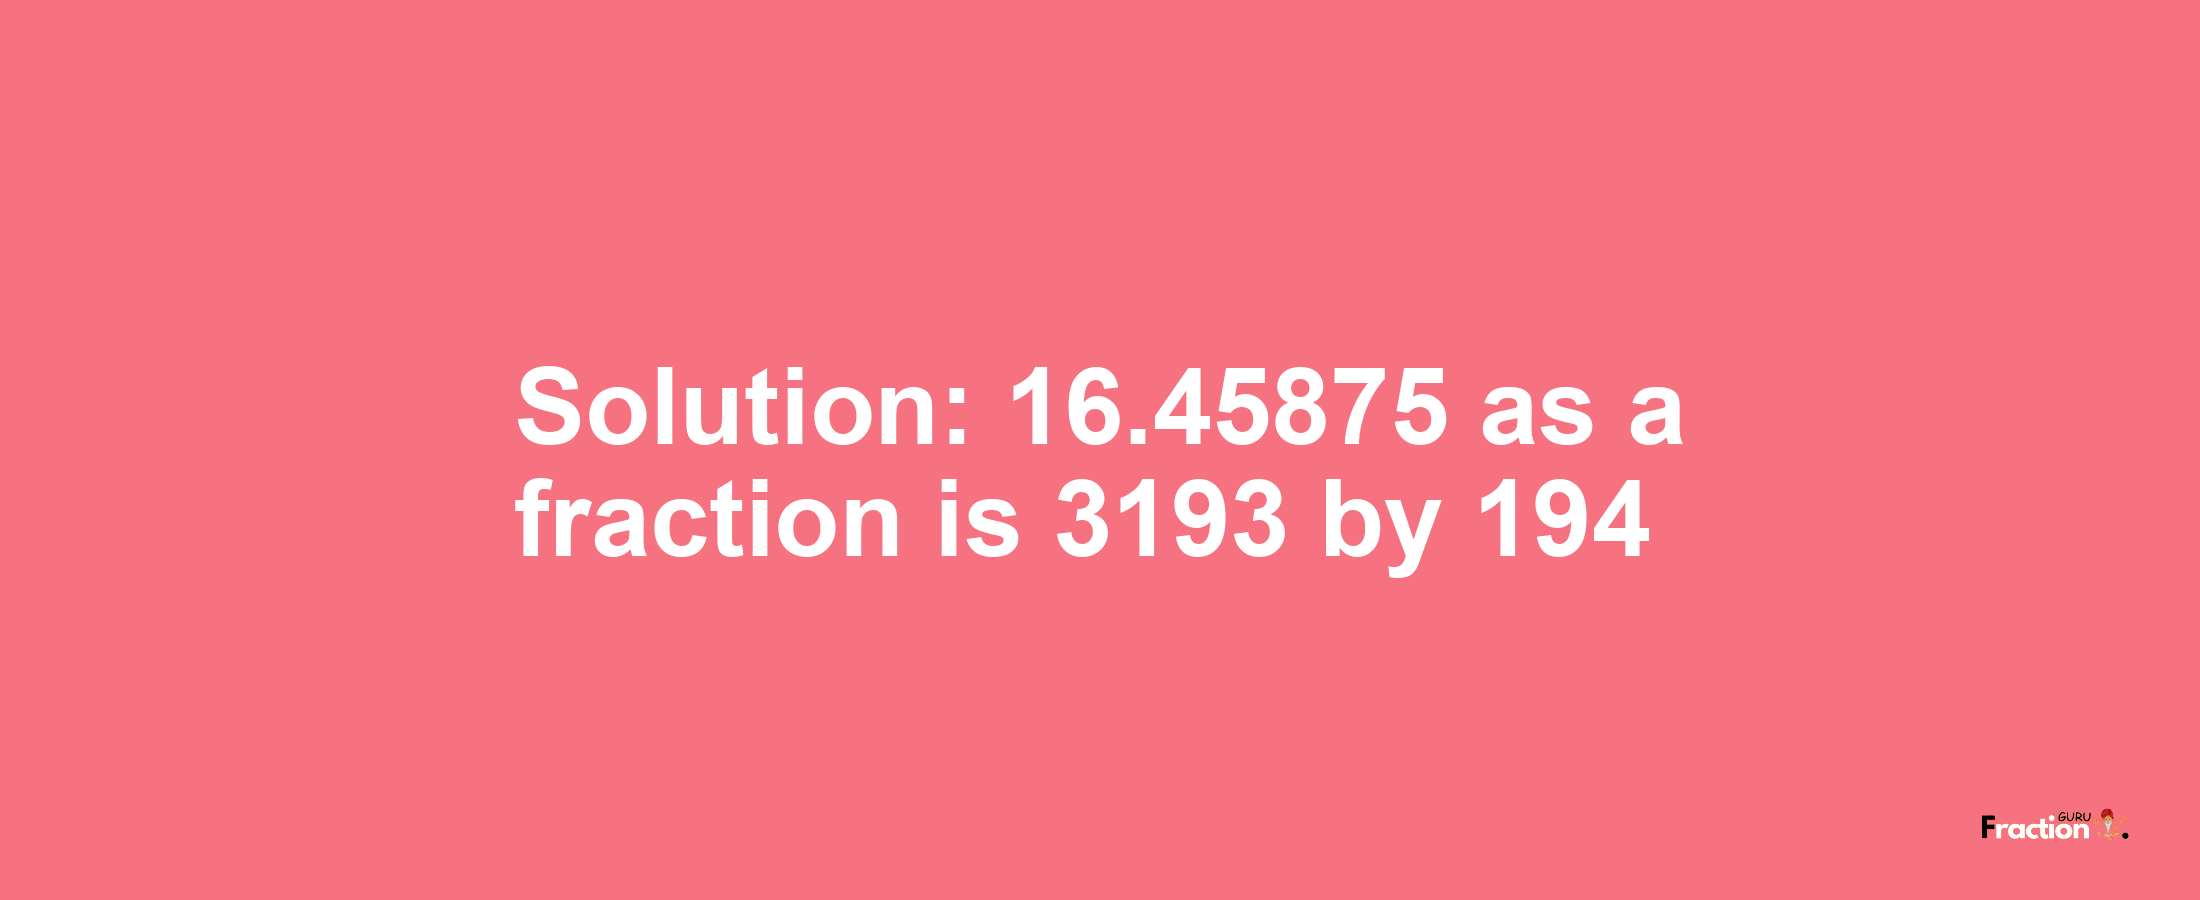 Solution:16.45875 as a fraction is 3193/194